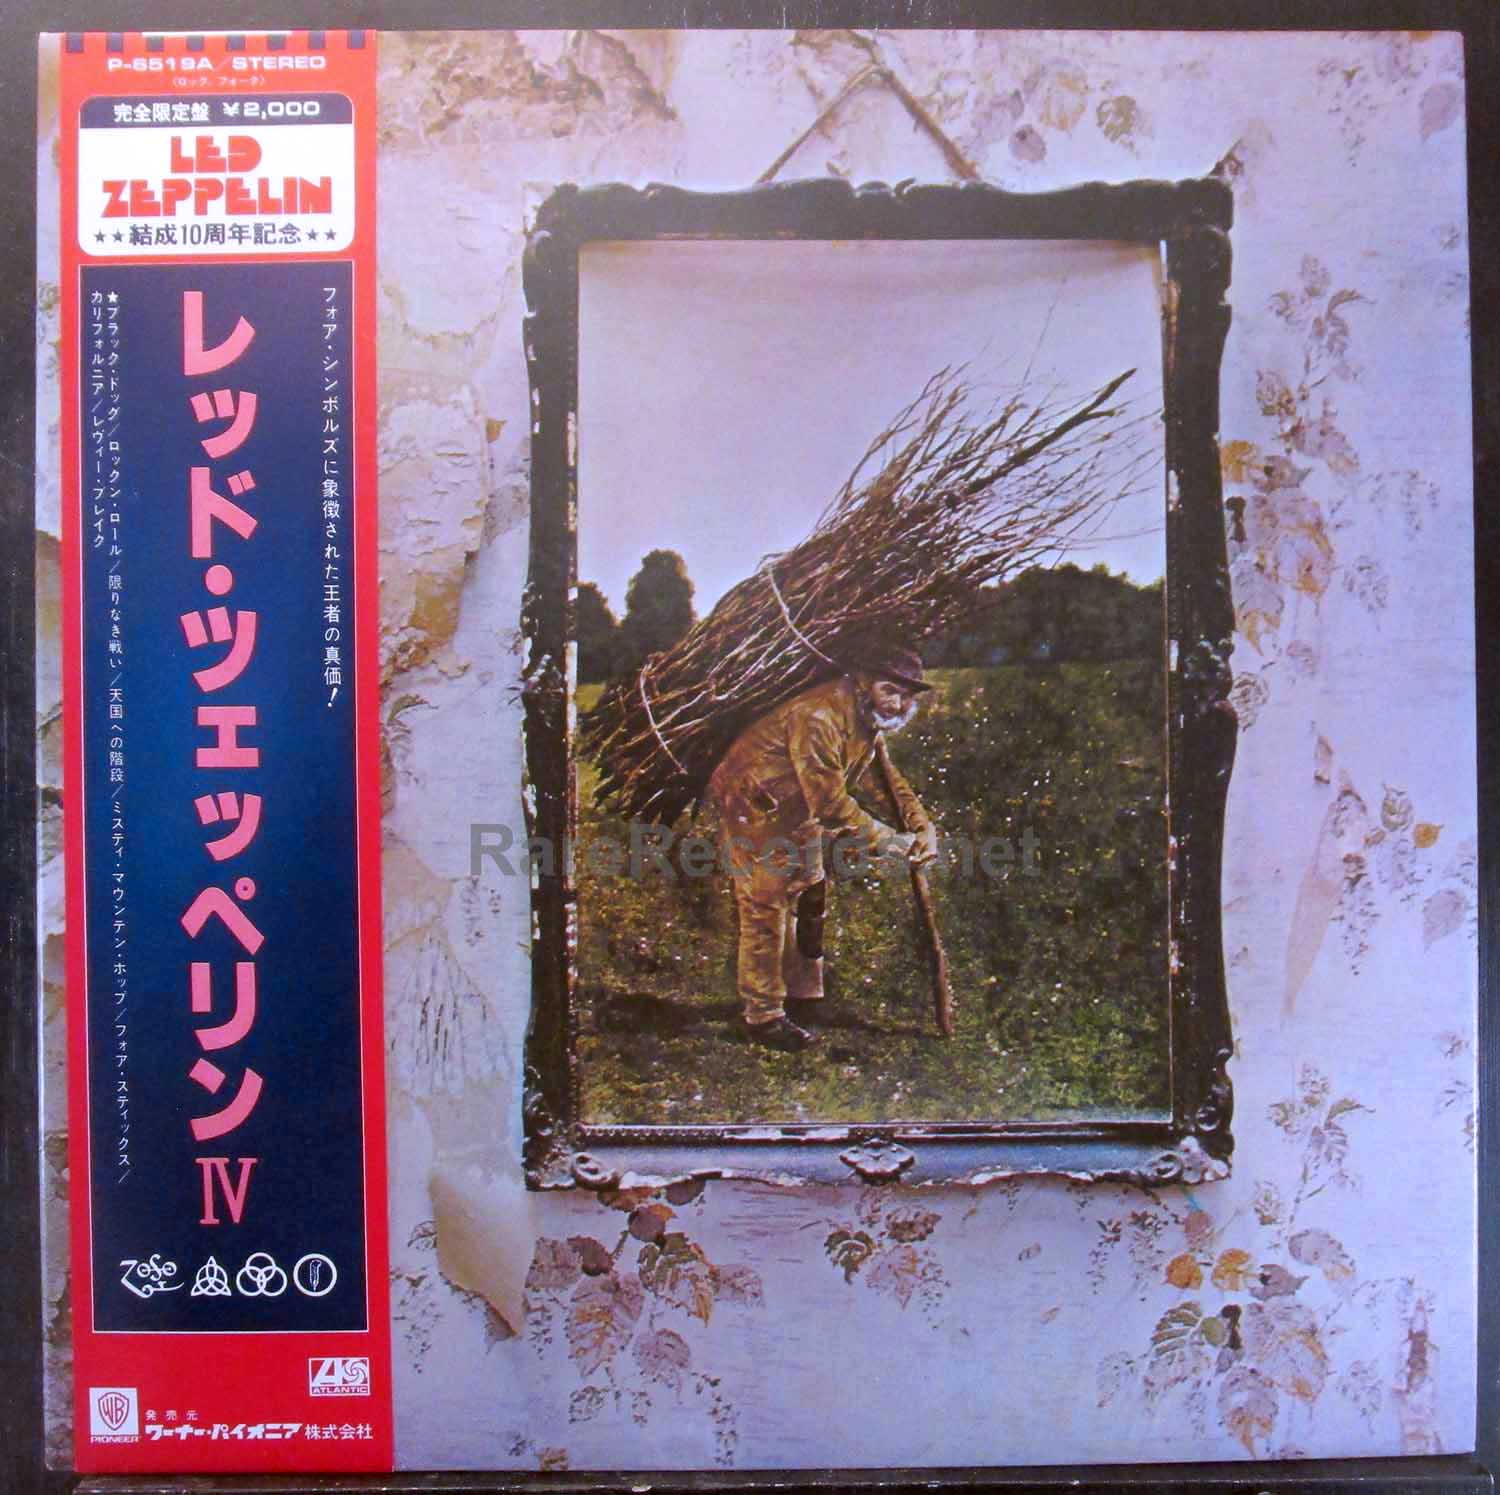 Led Zeppelin 1979 10th Anniversary Japan with obi